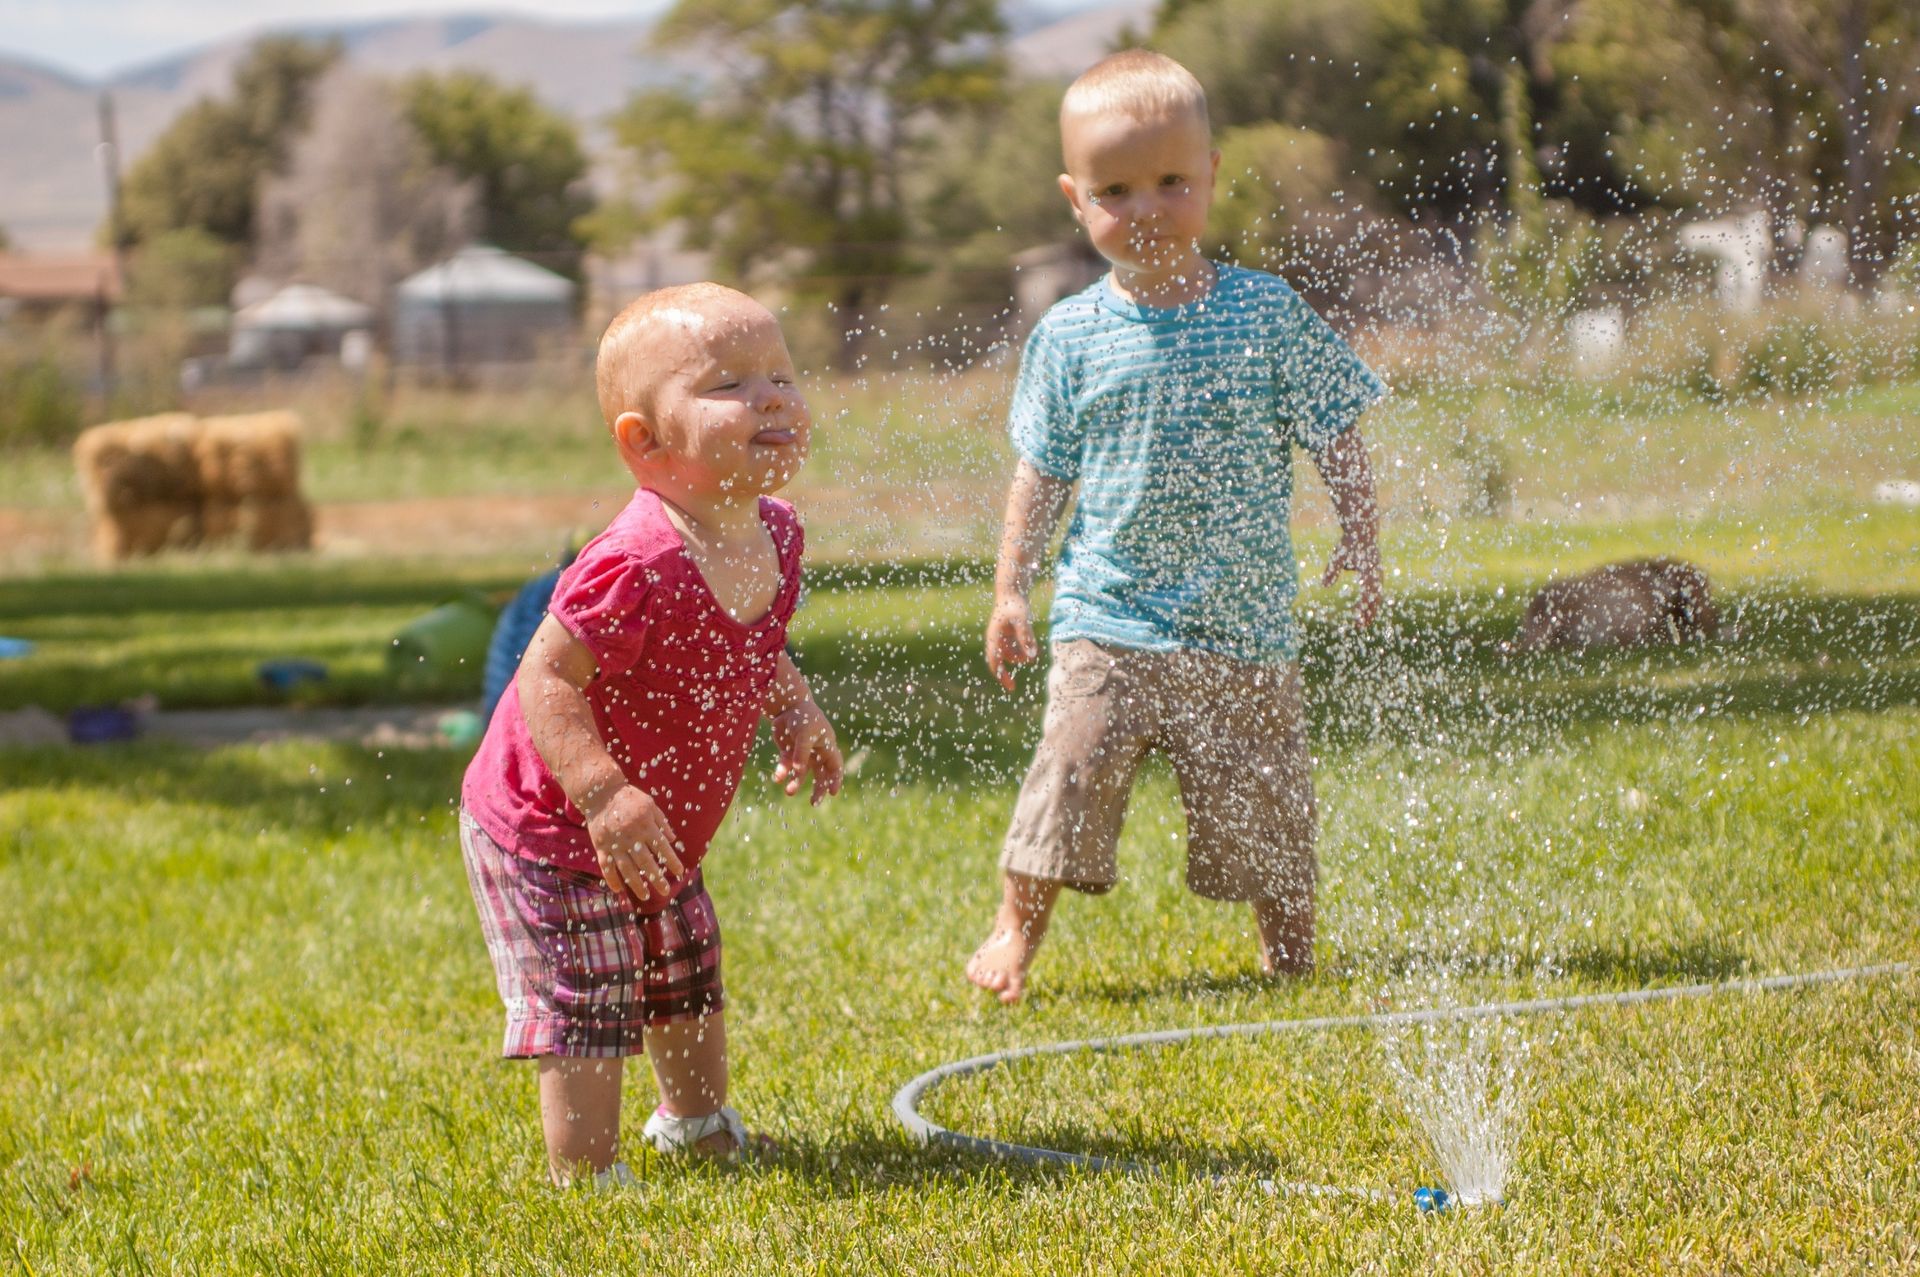 A baby and a toddler play in a sprinkler together outside.